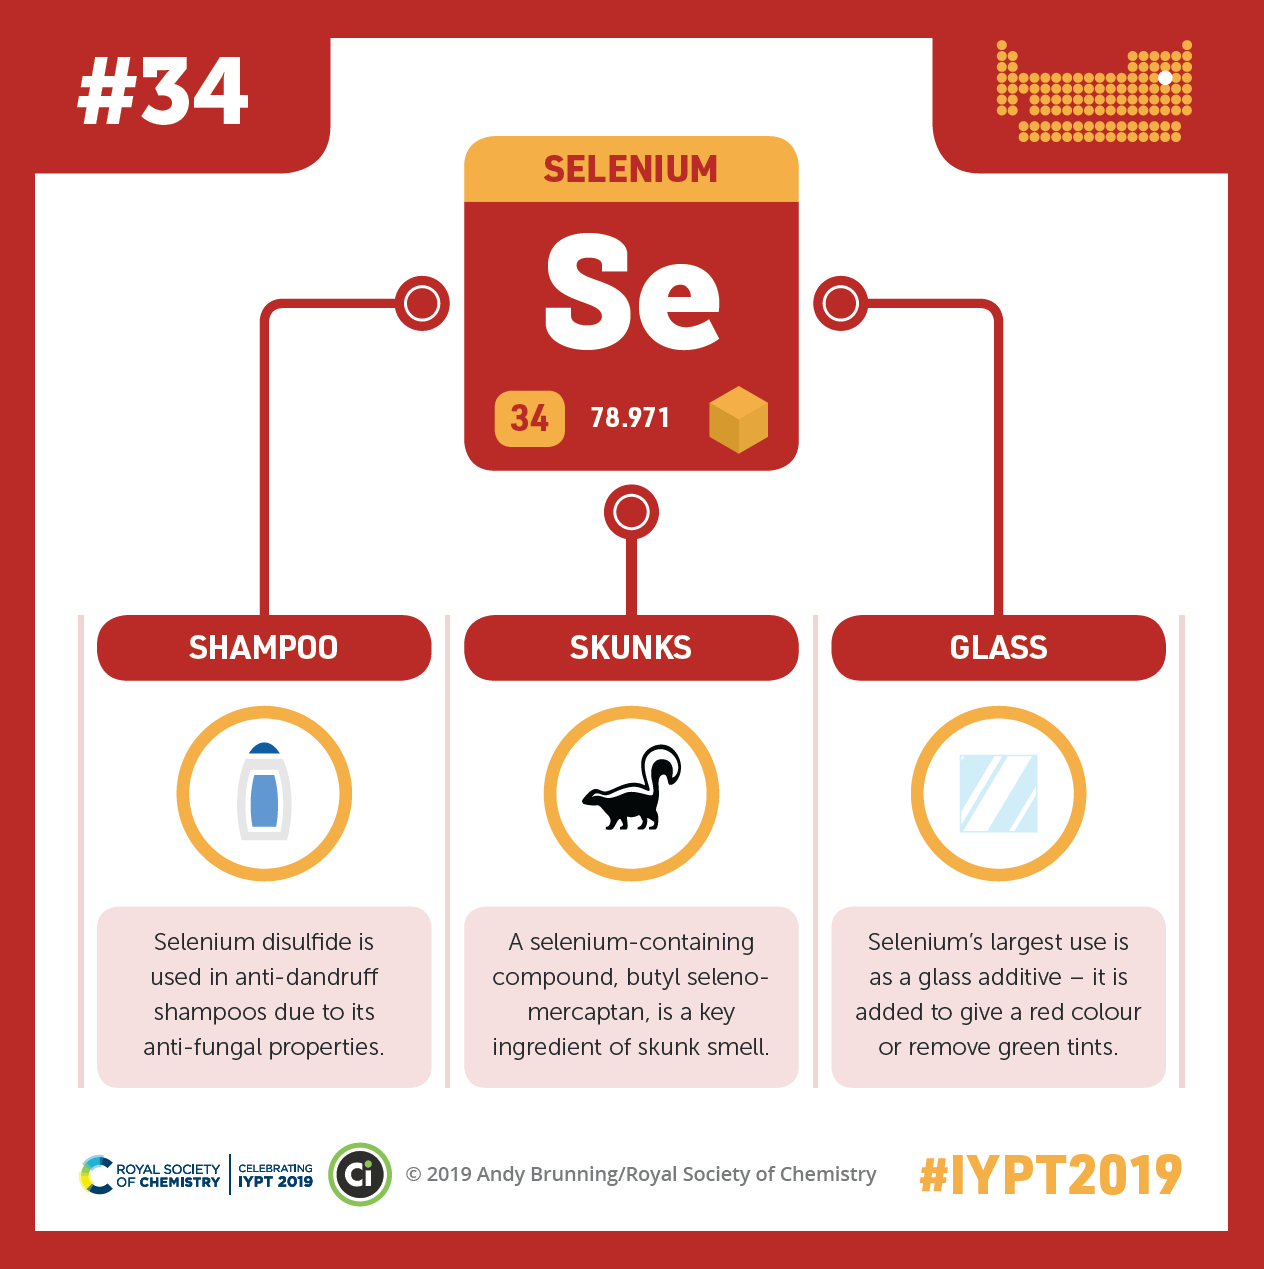 A graphic showing selenium’s symbol “Se”, atomic number, and atomic weight connected by lines to illustrations of a shampoo bottle, a skunk, and a sheet of glass. Selenium is used in antidandruff shampoo for its antifungal properties, found in the smelly spray of skunks, and used in glass to give a red color or remove green tints.